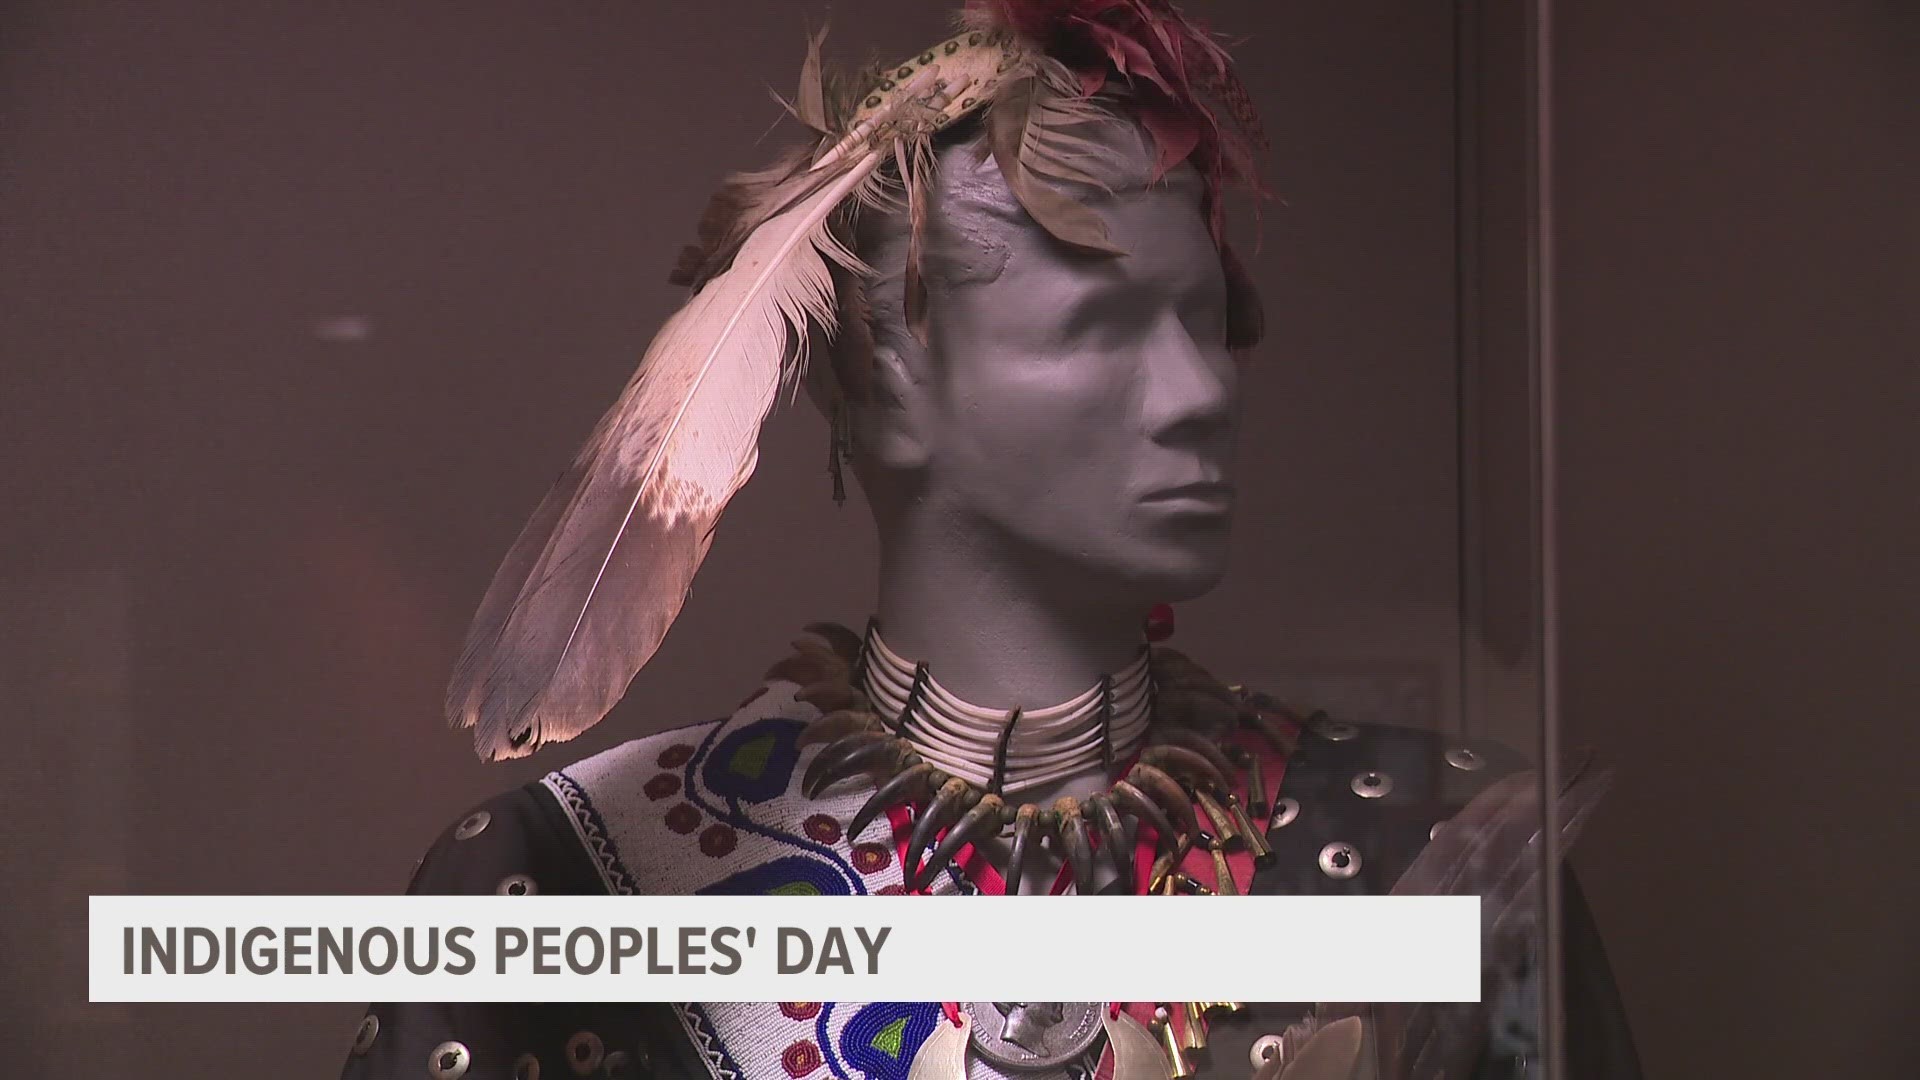 Monday, Oct. 9 is a national holiday called Columbus Day. But in Michigan, it's also Indigenous Peoples' Day. There are 12 federally recognized tribes in Michigan.